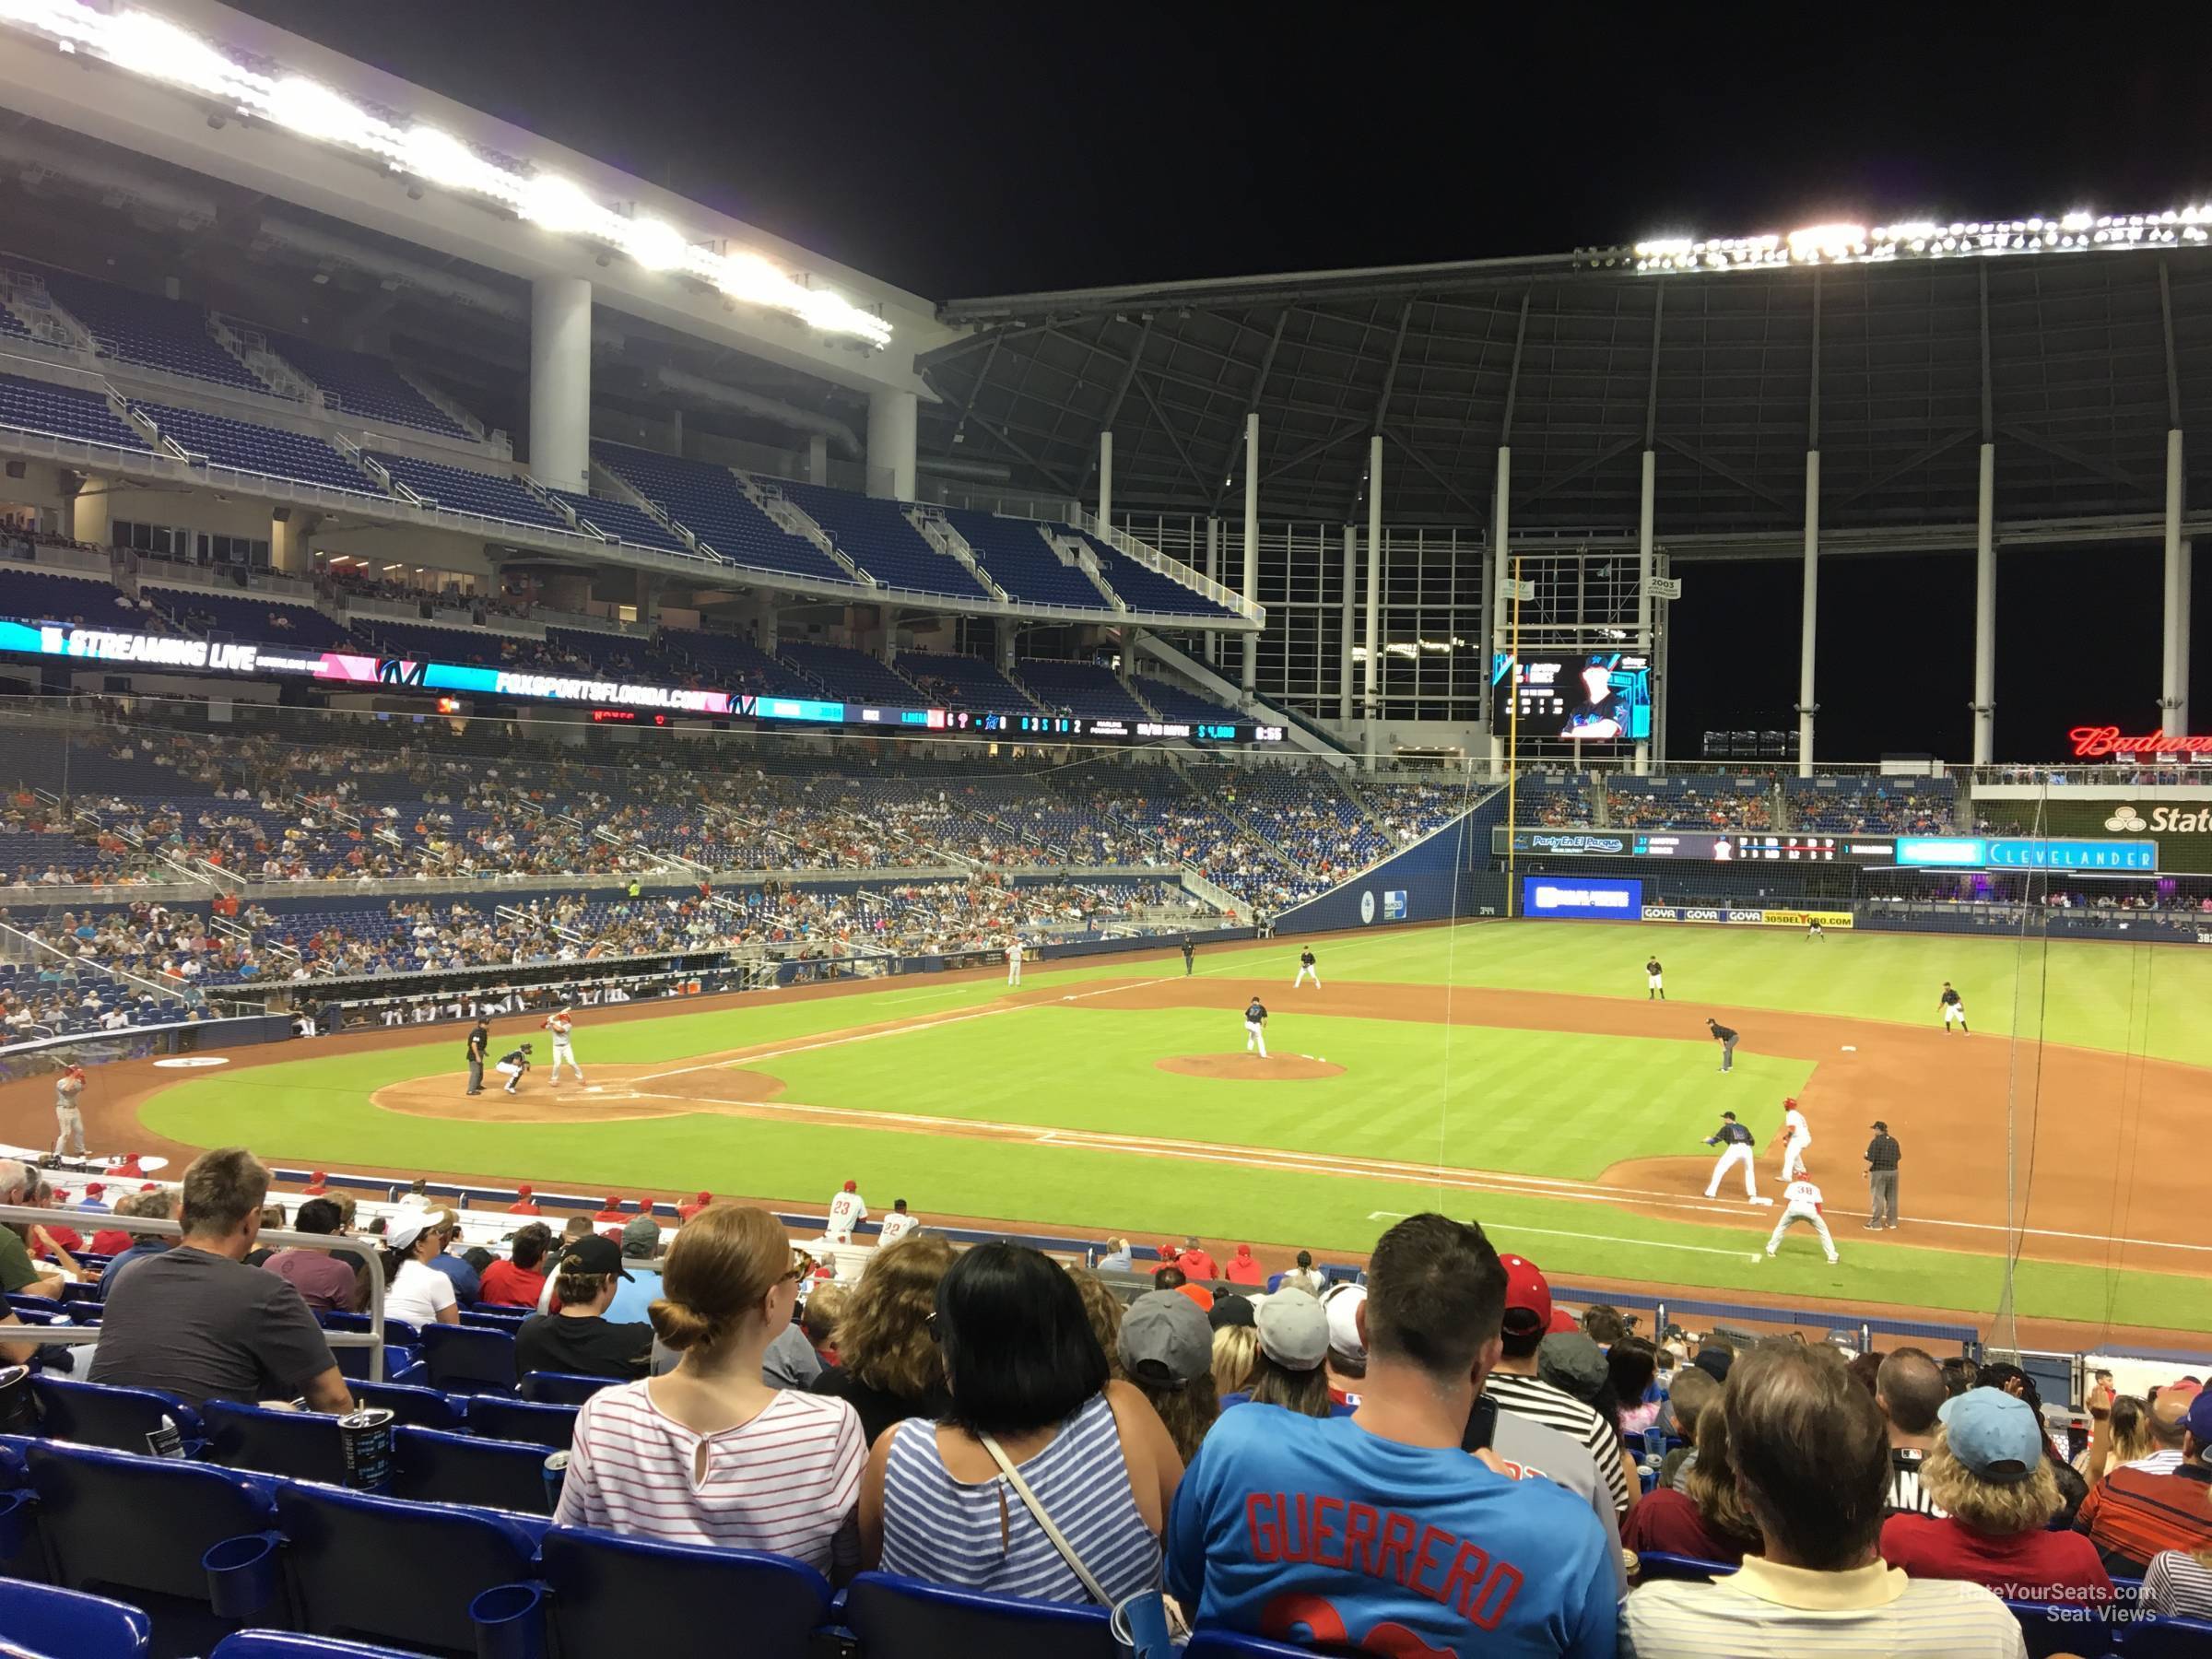 LoanDepot Park, section 40, row 8, home of Miami Marlins , page 1